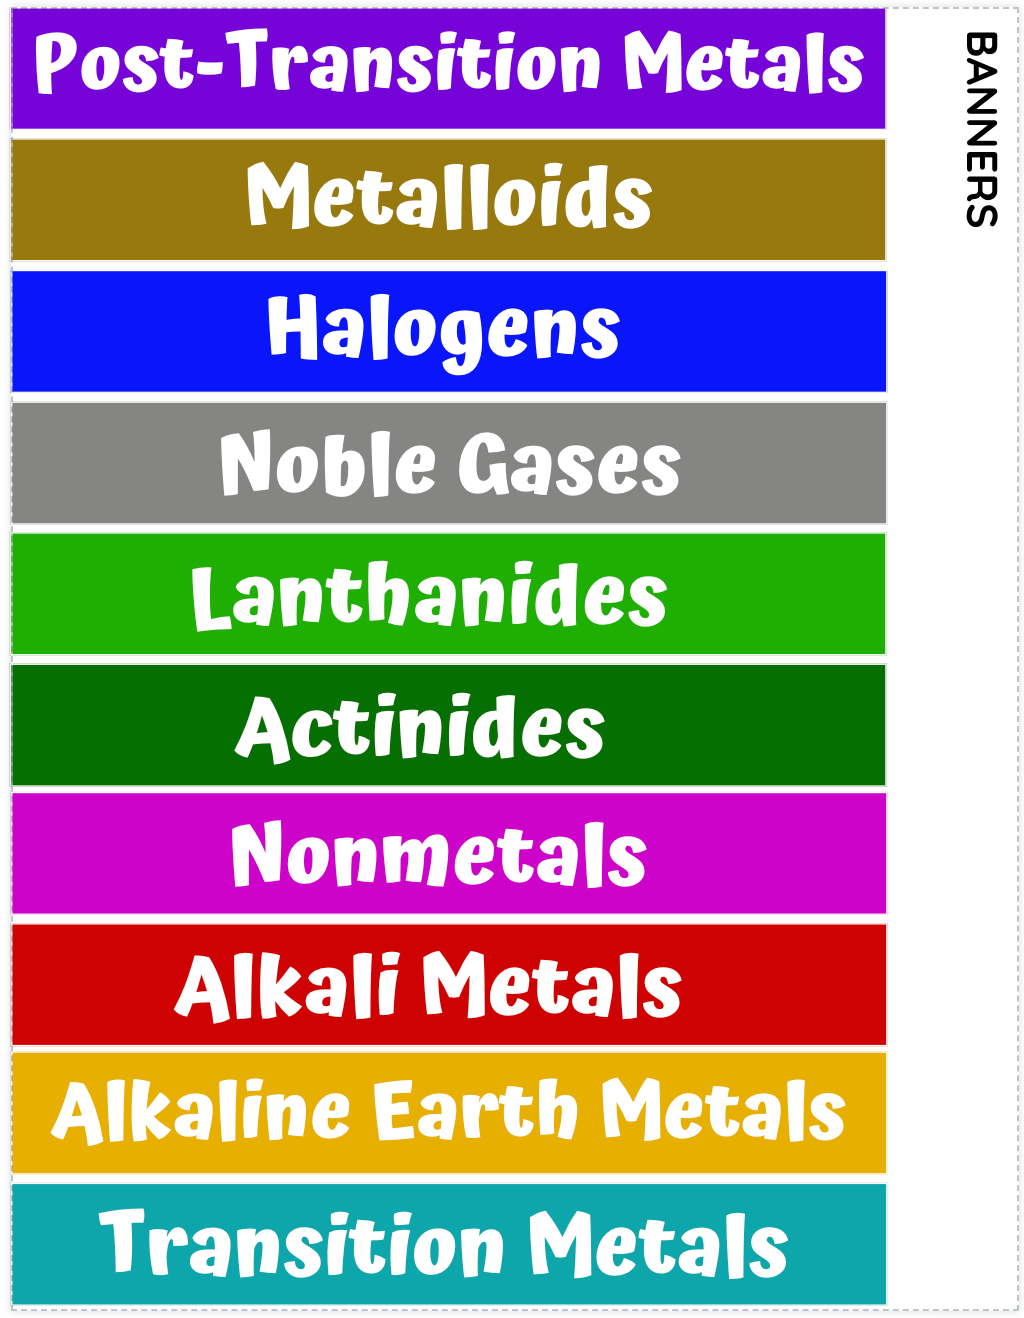 The Periodic Table Game of Elements - PHYSICAL & DIGITAL VERSION